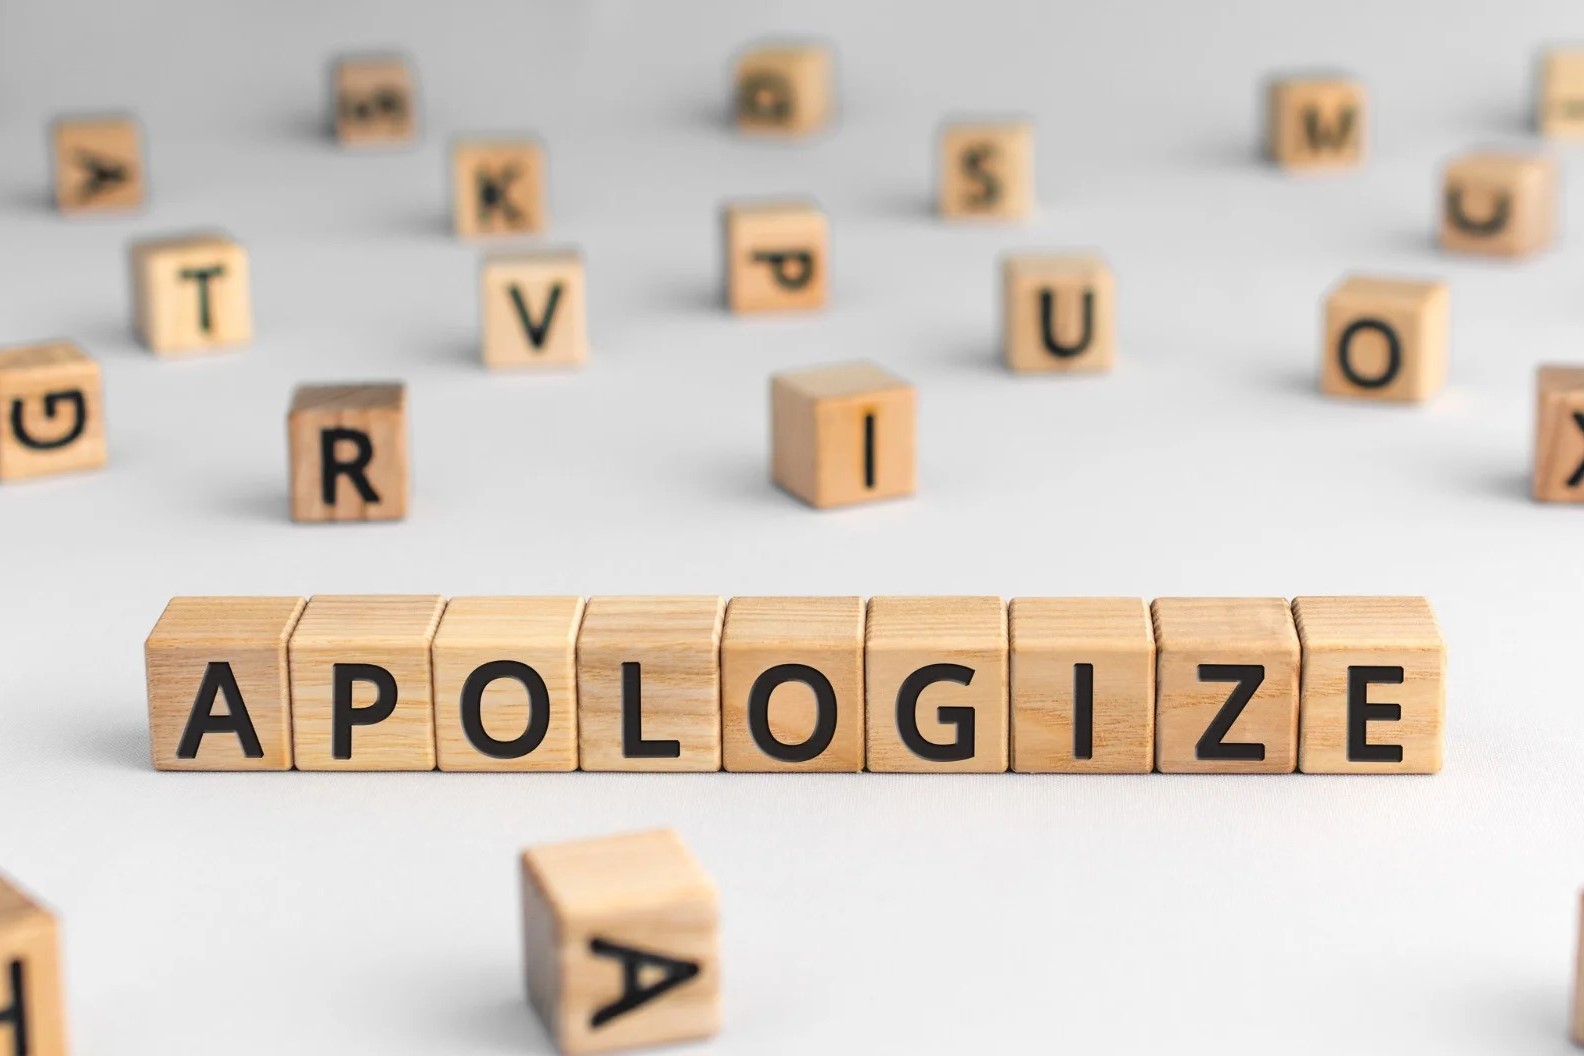 Is 'No Need To Apologize' Rude? Find Out Now!